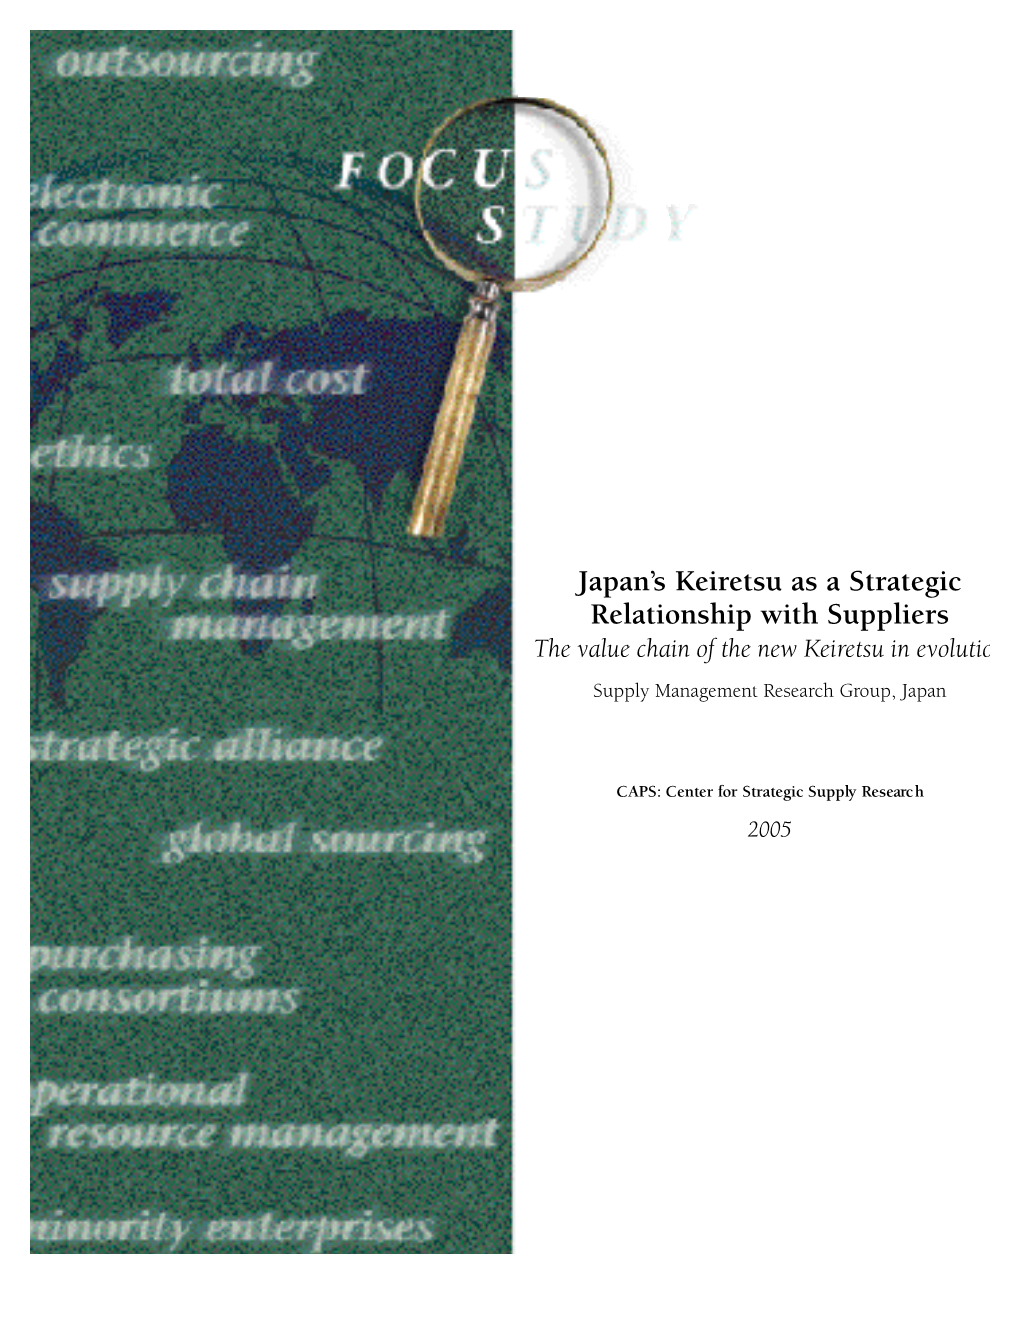 Japan's Keiretsu As a Strategic Relationship with Suppliers 2005